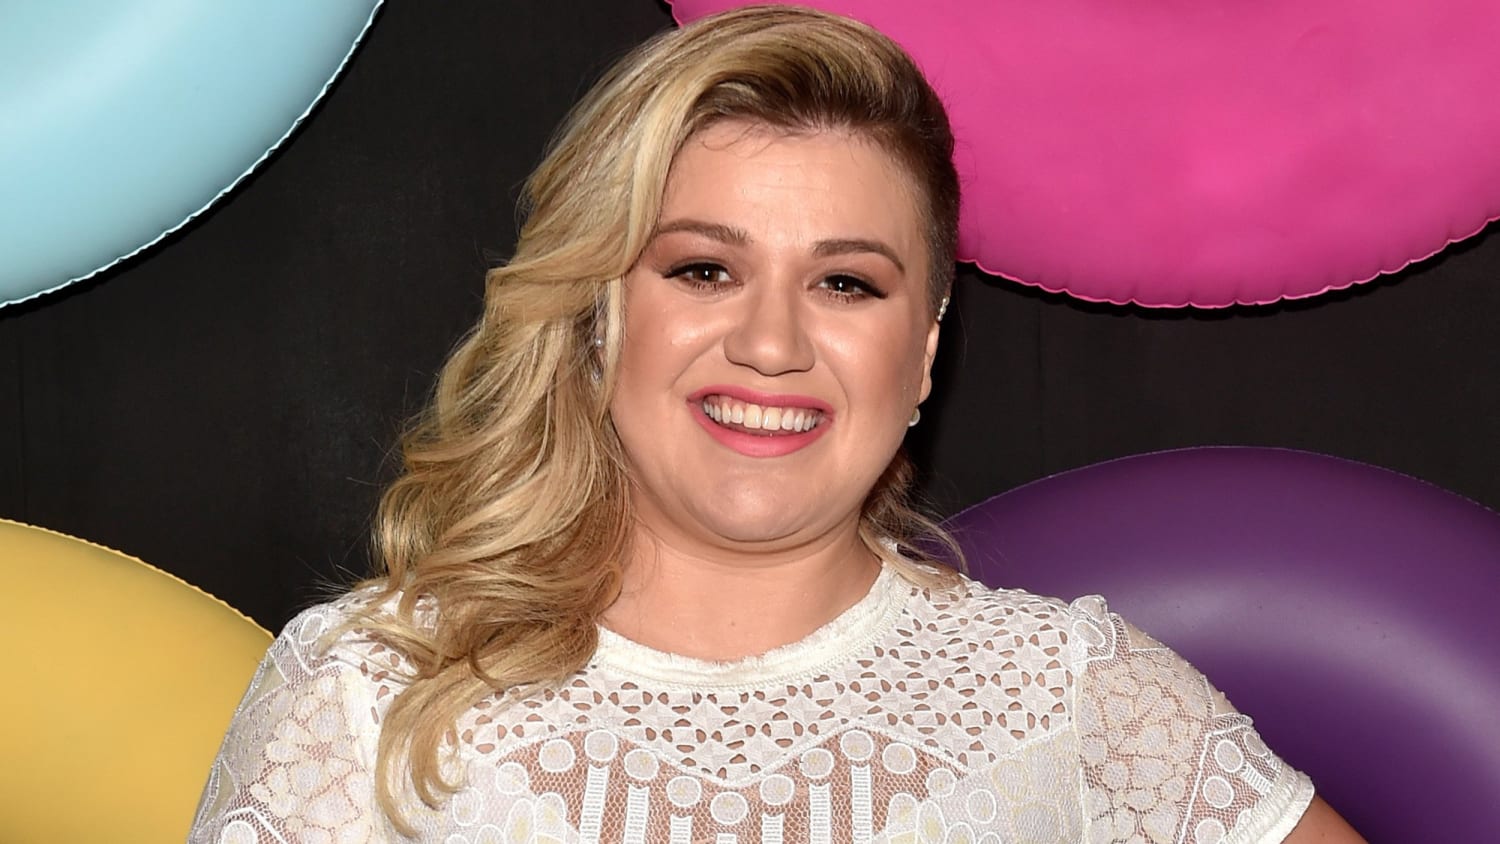 Kelly Clarkson's son Remy is all smiles after a shot in adorable new photo - TODAY.com